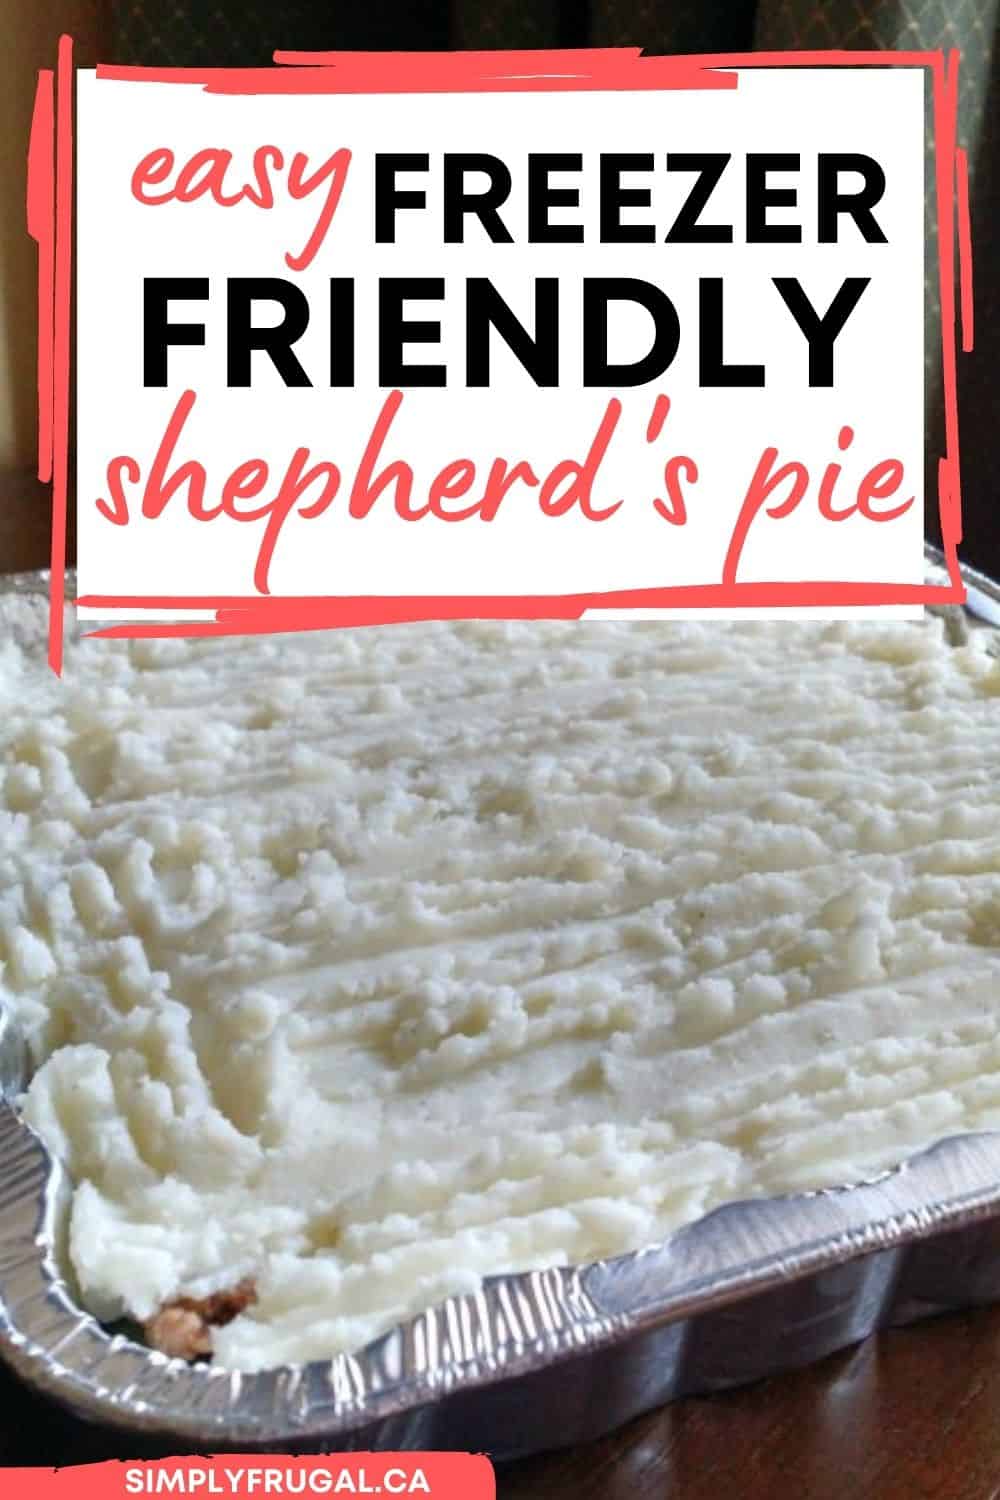 Easy freezer friendly Shepherd's pie recipeThis recipe for the ultimate comfort food, Easy Freezer-Friendly Shepherd’s Pie will soon be one of your family's favorite meals!